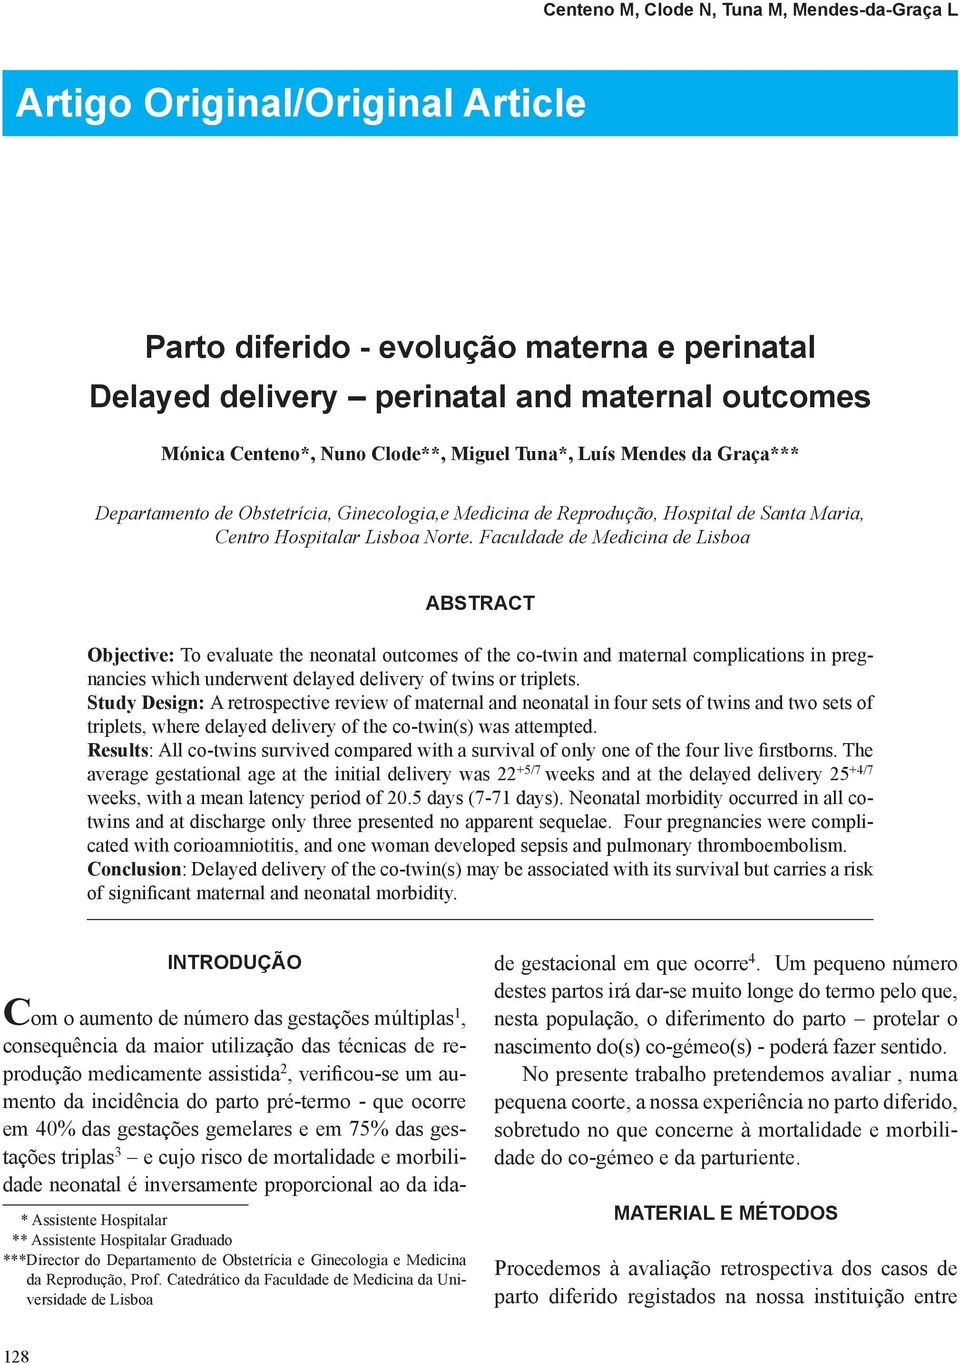 Faculdade de Medicina de Lisboa ABSTRACT Objective: To evaluate the neonatal outcomes of the co-twin and maternal complications in pregnancies which underwent delayed delivery of twins or triplets.